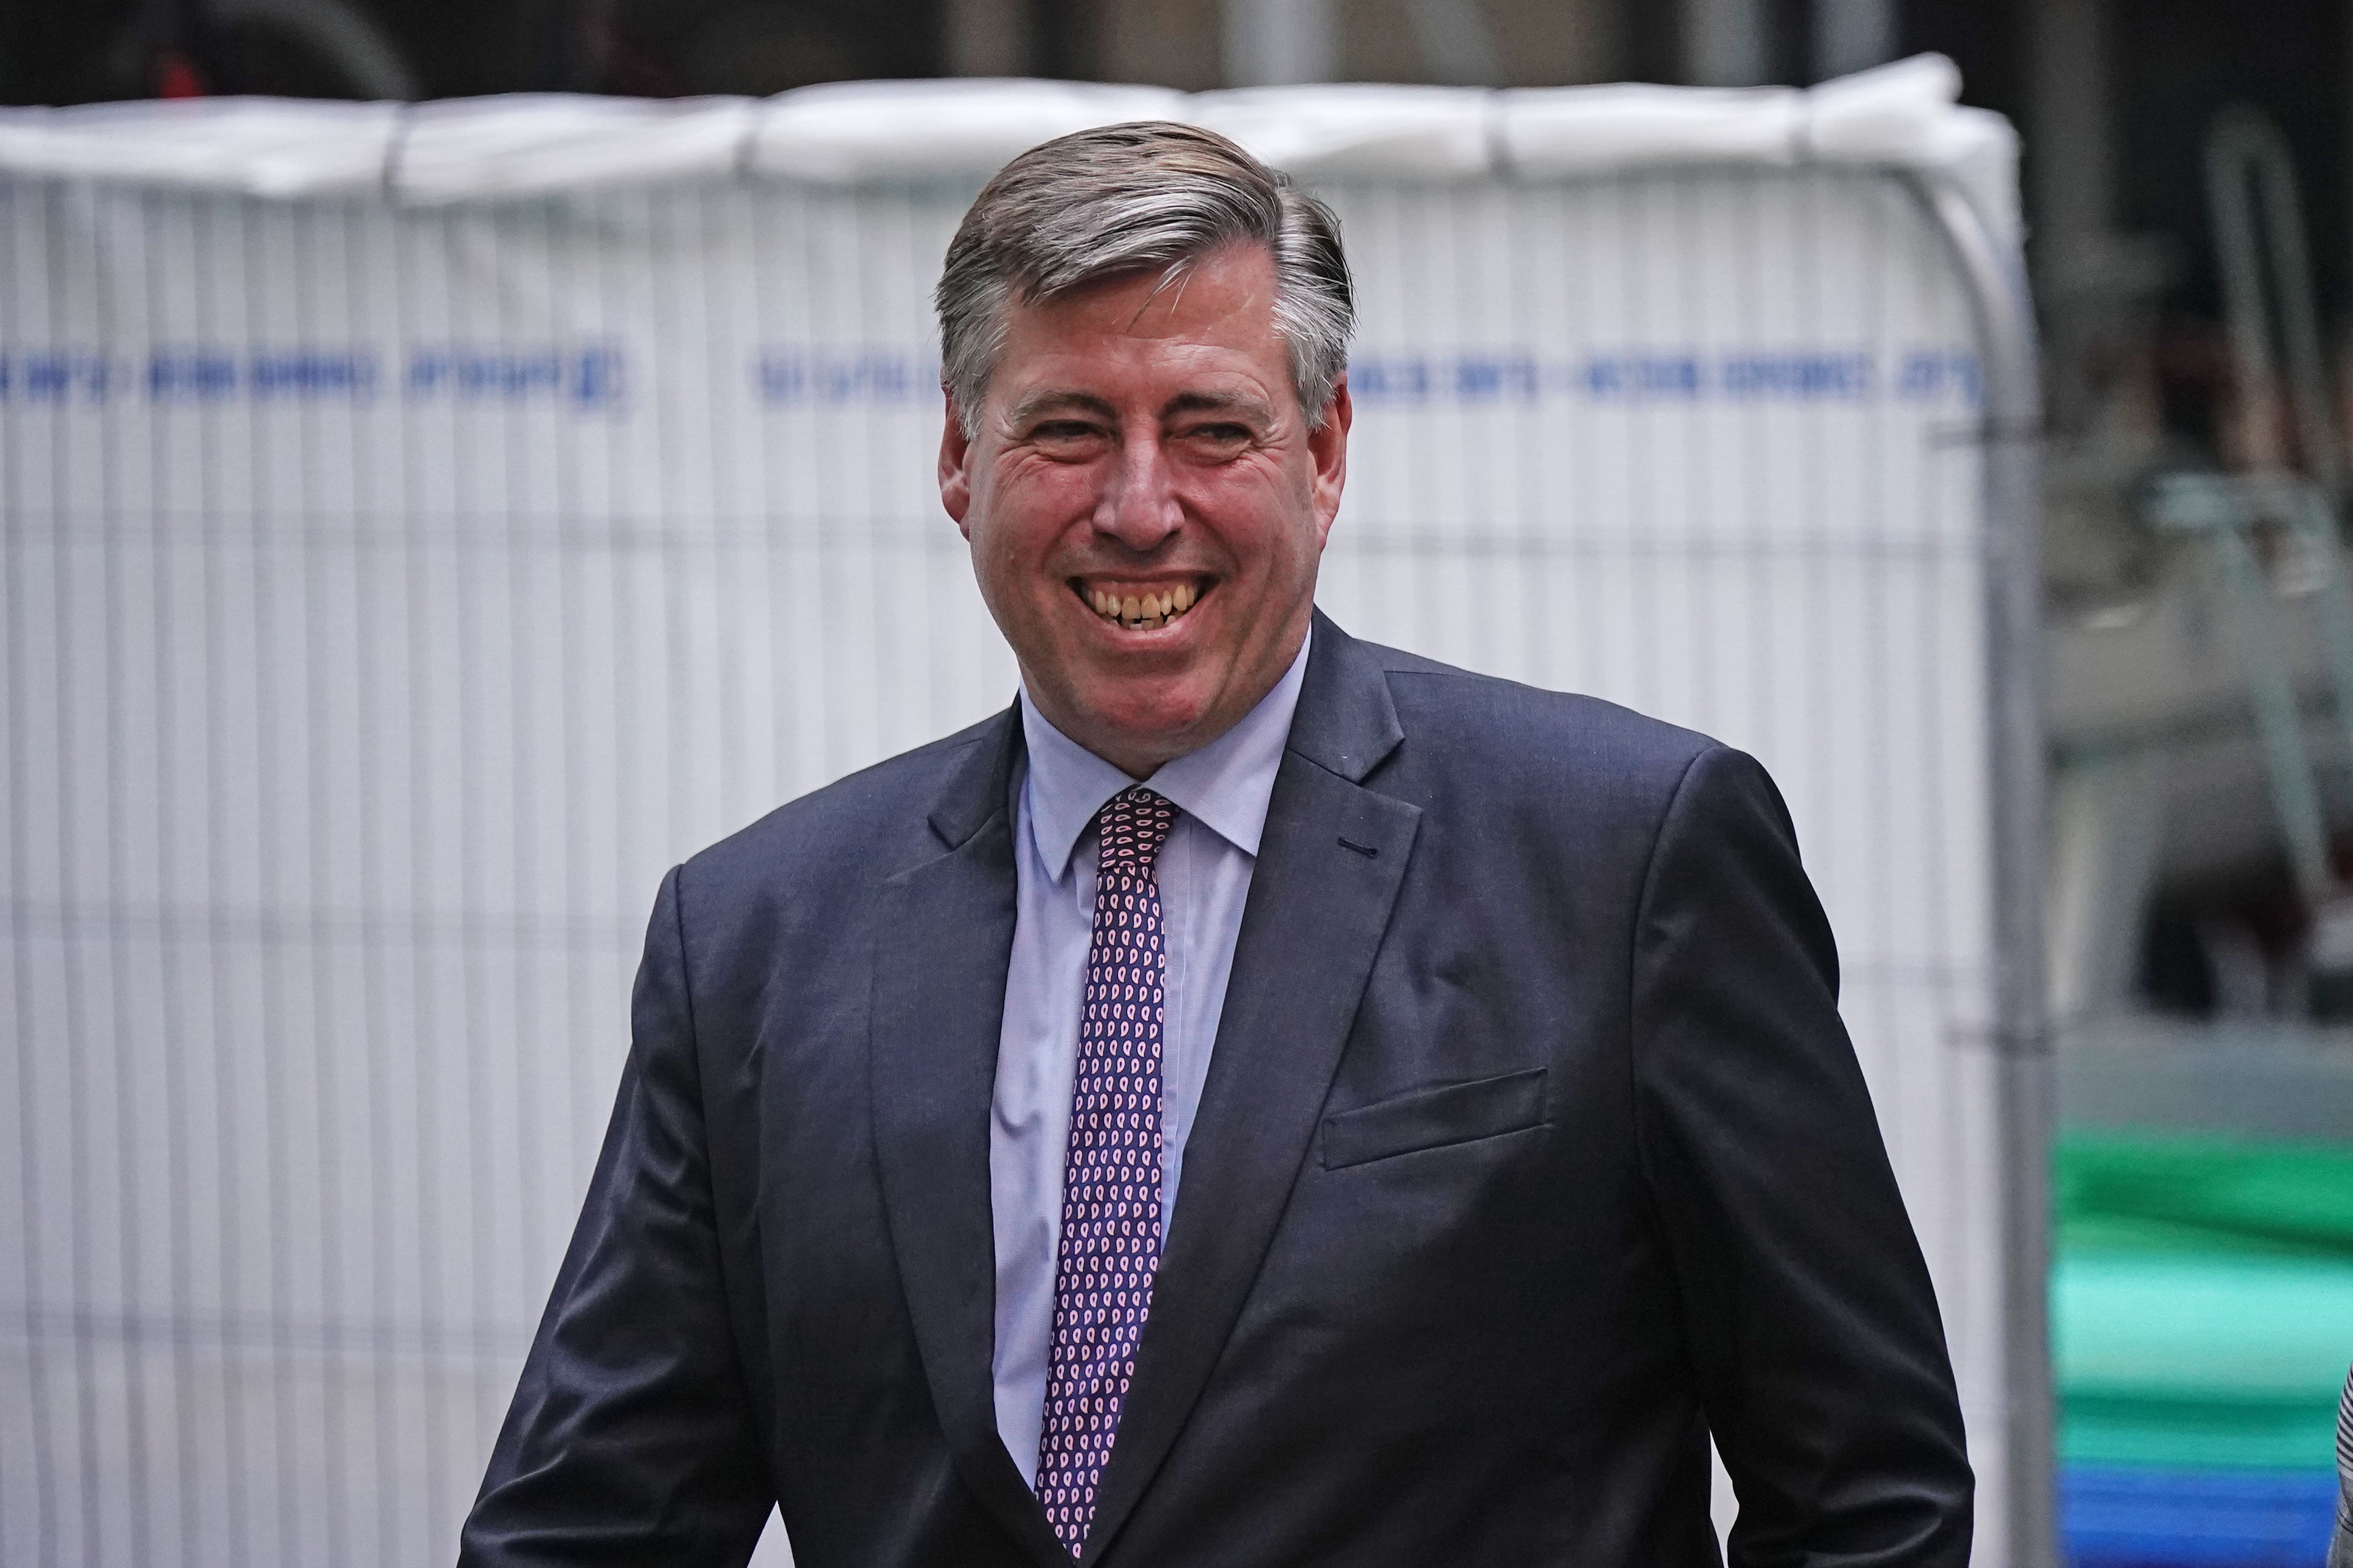 Sir Graham Brady has announced he will step down at the next general election